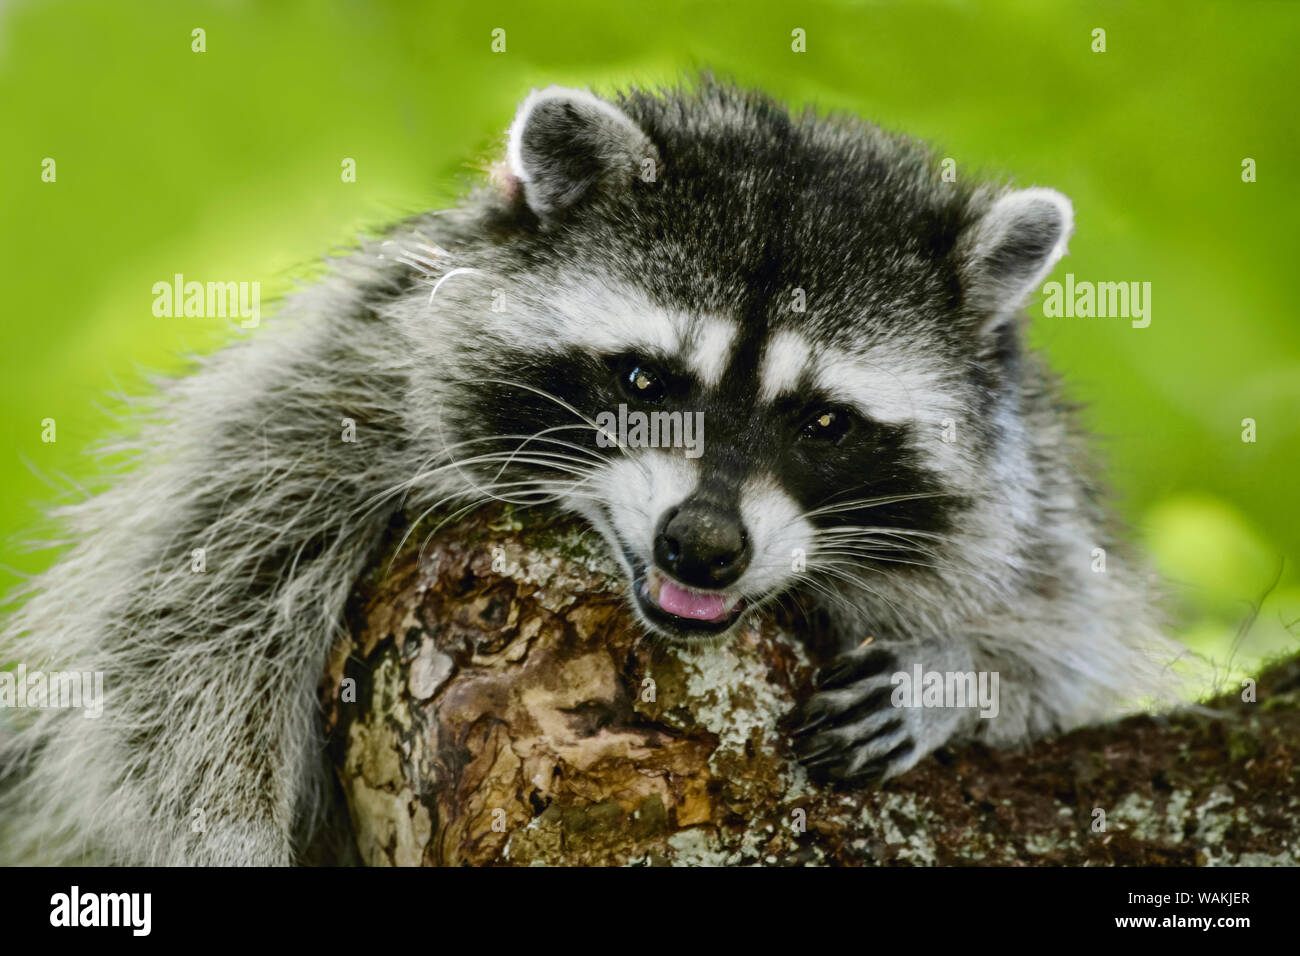 Issaquah, Washington State, USA. Wild mother raccoon growling in a tree, protecting her young who were further up the tree. Stock Photo